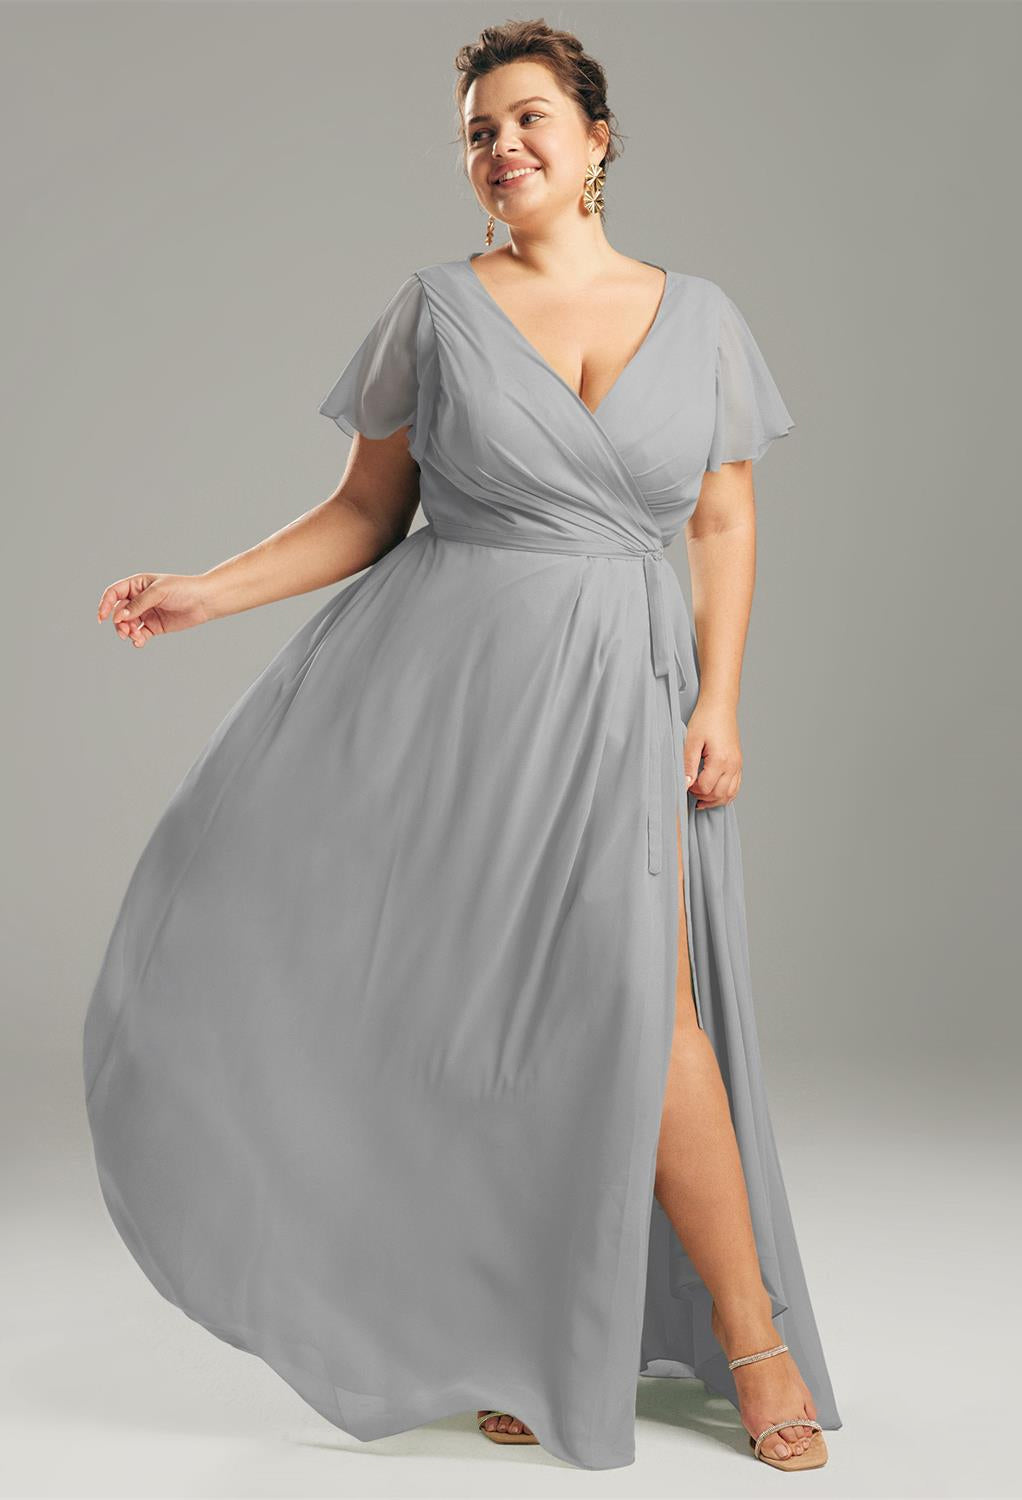 An Ellison - Chiffon Bridesmaid Dress - Off The Rack in the color grey with a split slit is available at Bergamot Bridal shops in London.